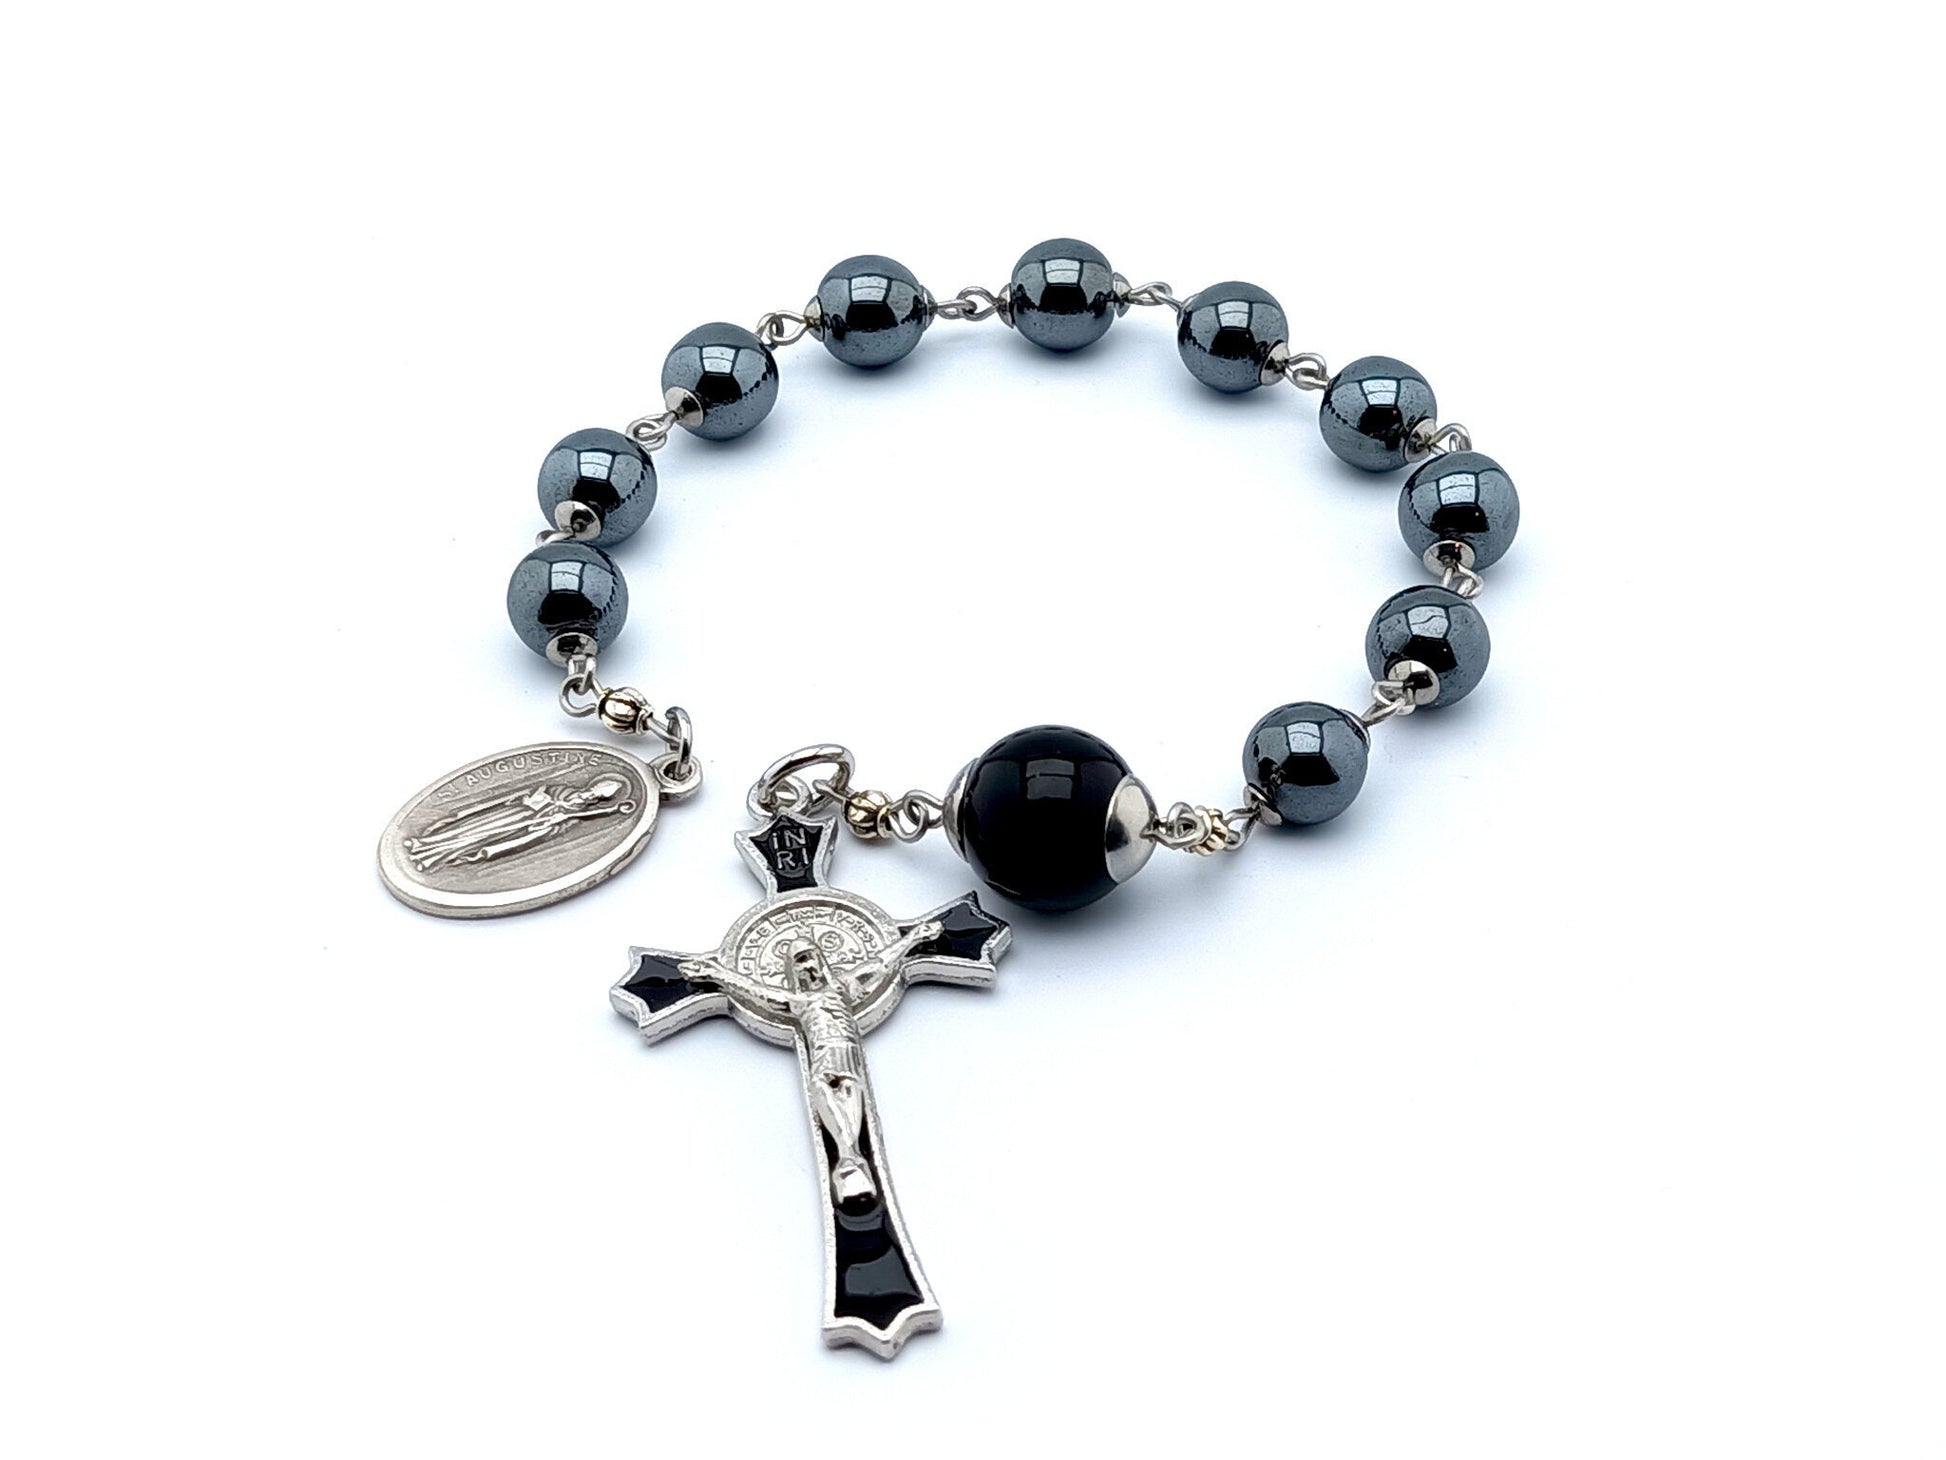 Saint Augustine unique rosary beads single decade rosary with hematite and onyx beads, black and silver enamel crucifix and end medal.